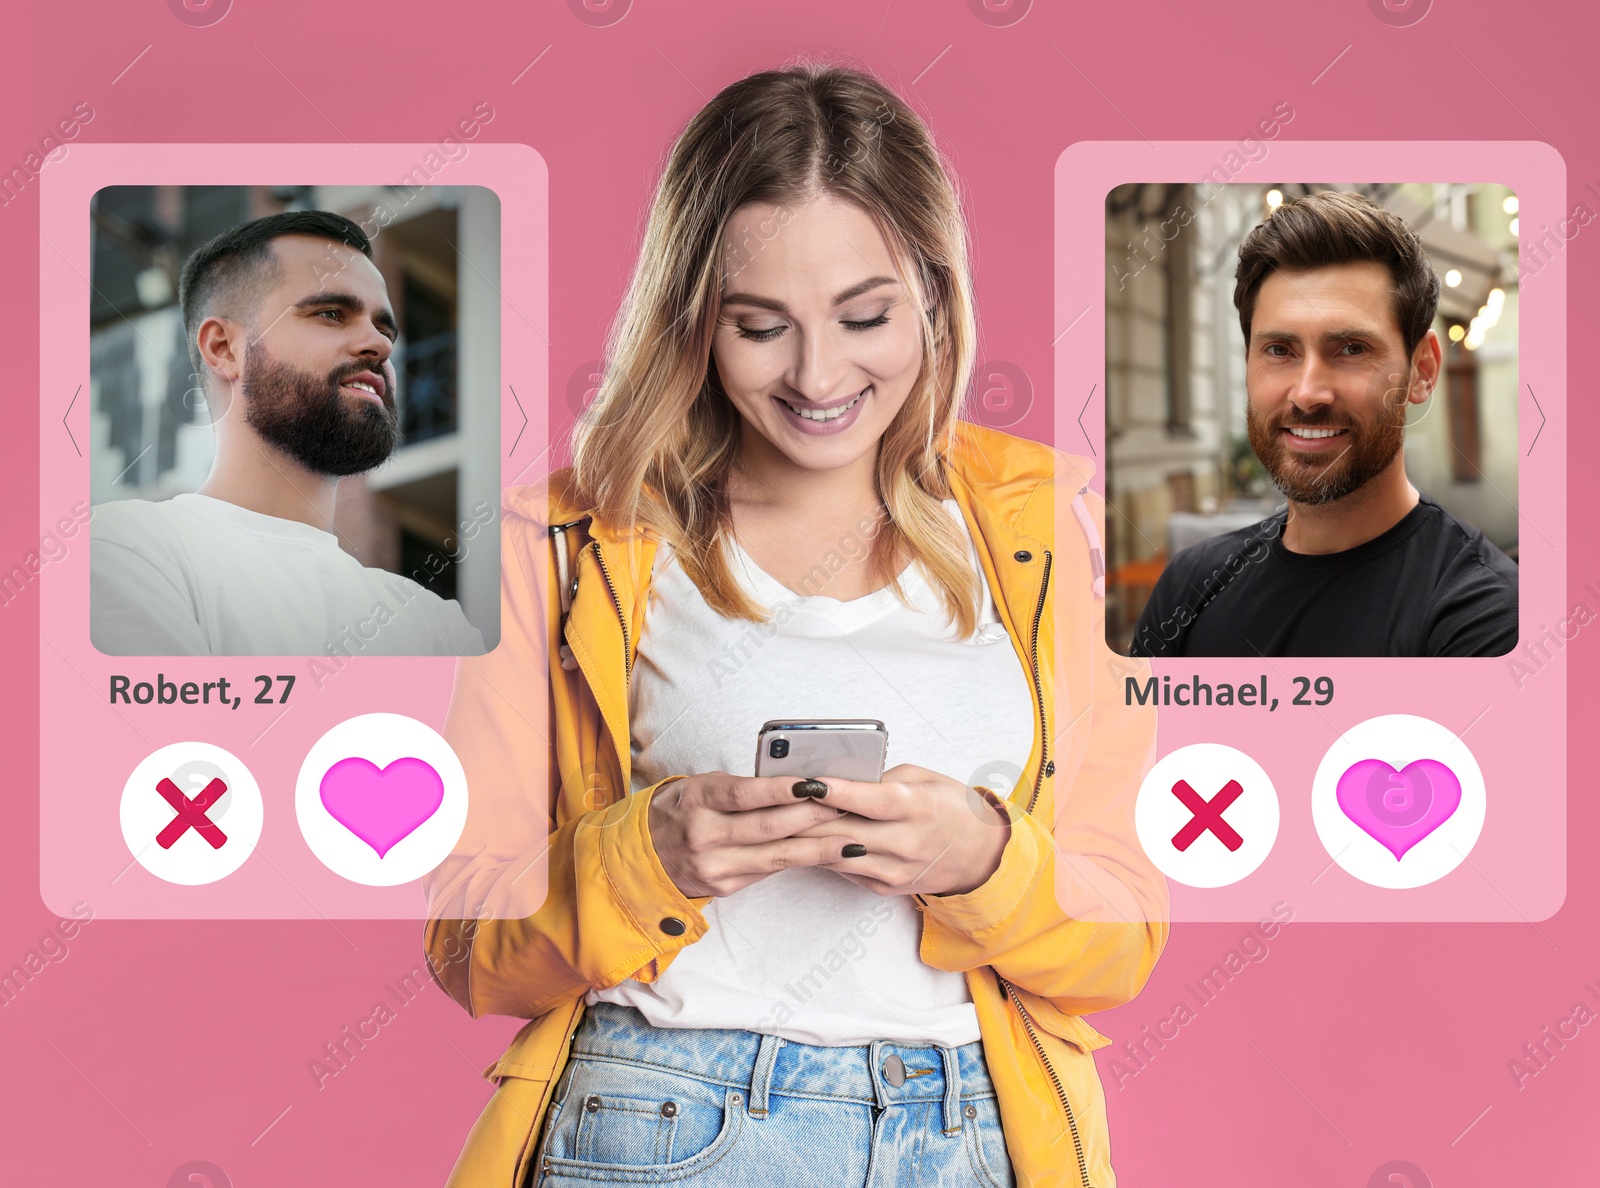 Image of Looking for partner via dating site. Woman using smartphone on pink background. Men's profiles with photos and information